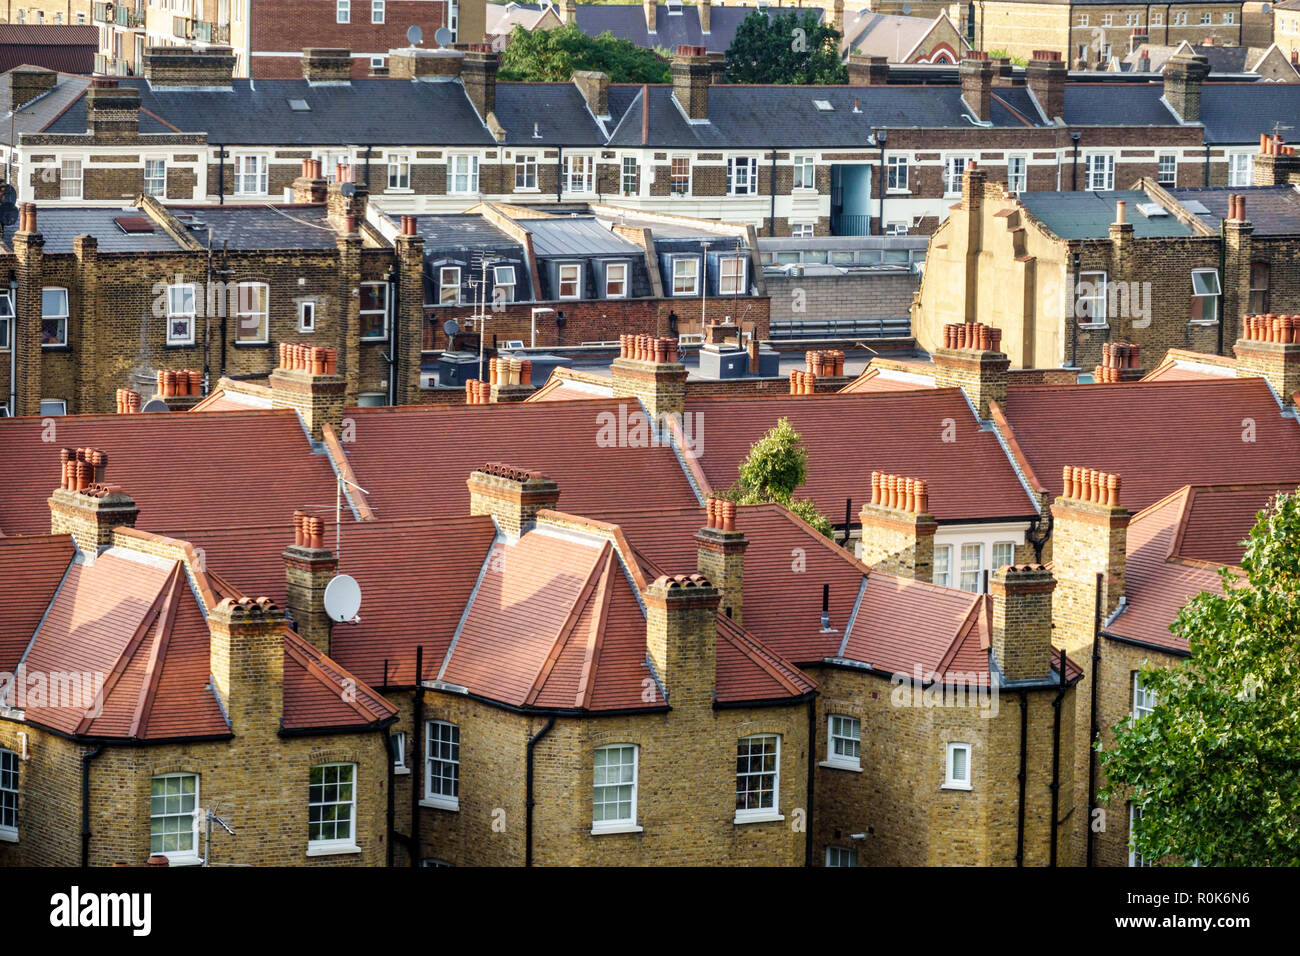 London England,UK,Lambeth South Bank,terraced row houses,rooftops,identical mirror image houses,townhomes,chimneys,tiled roof,brick,UK GB English Euro Stock Photo